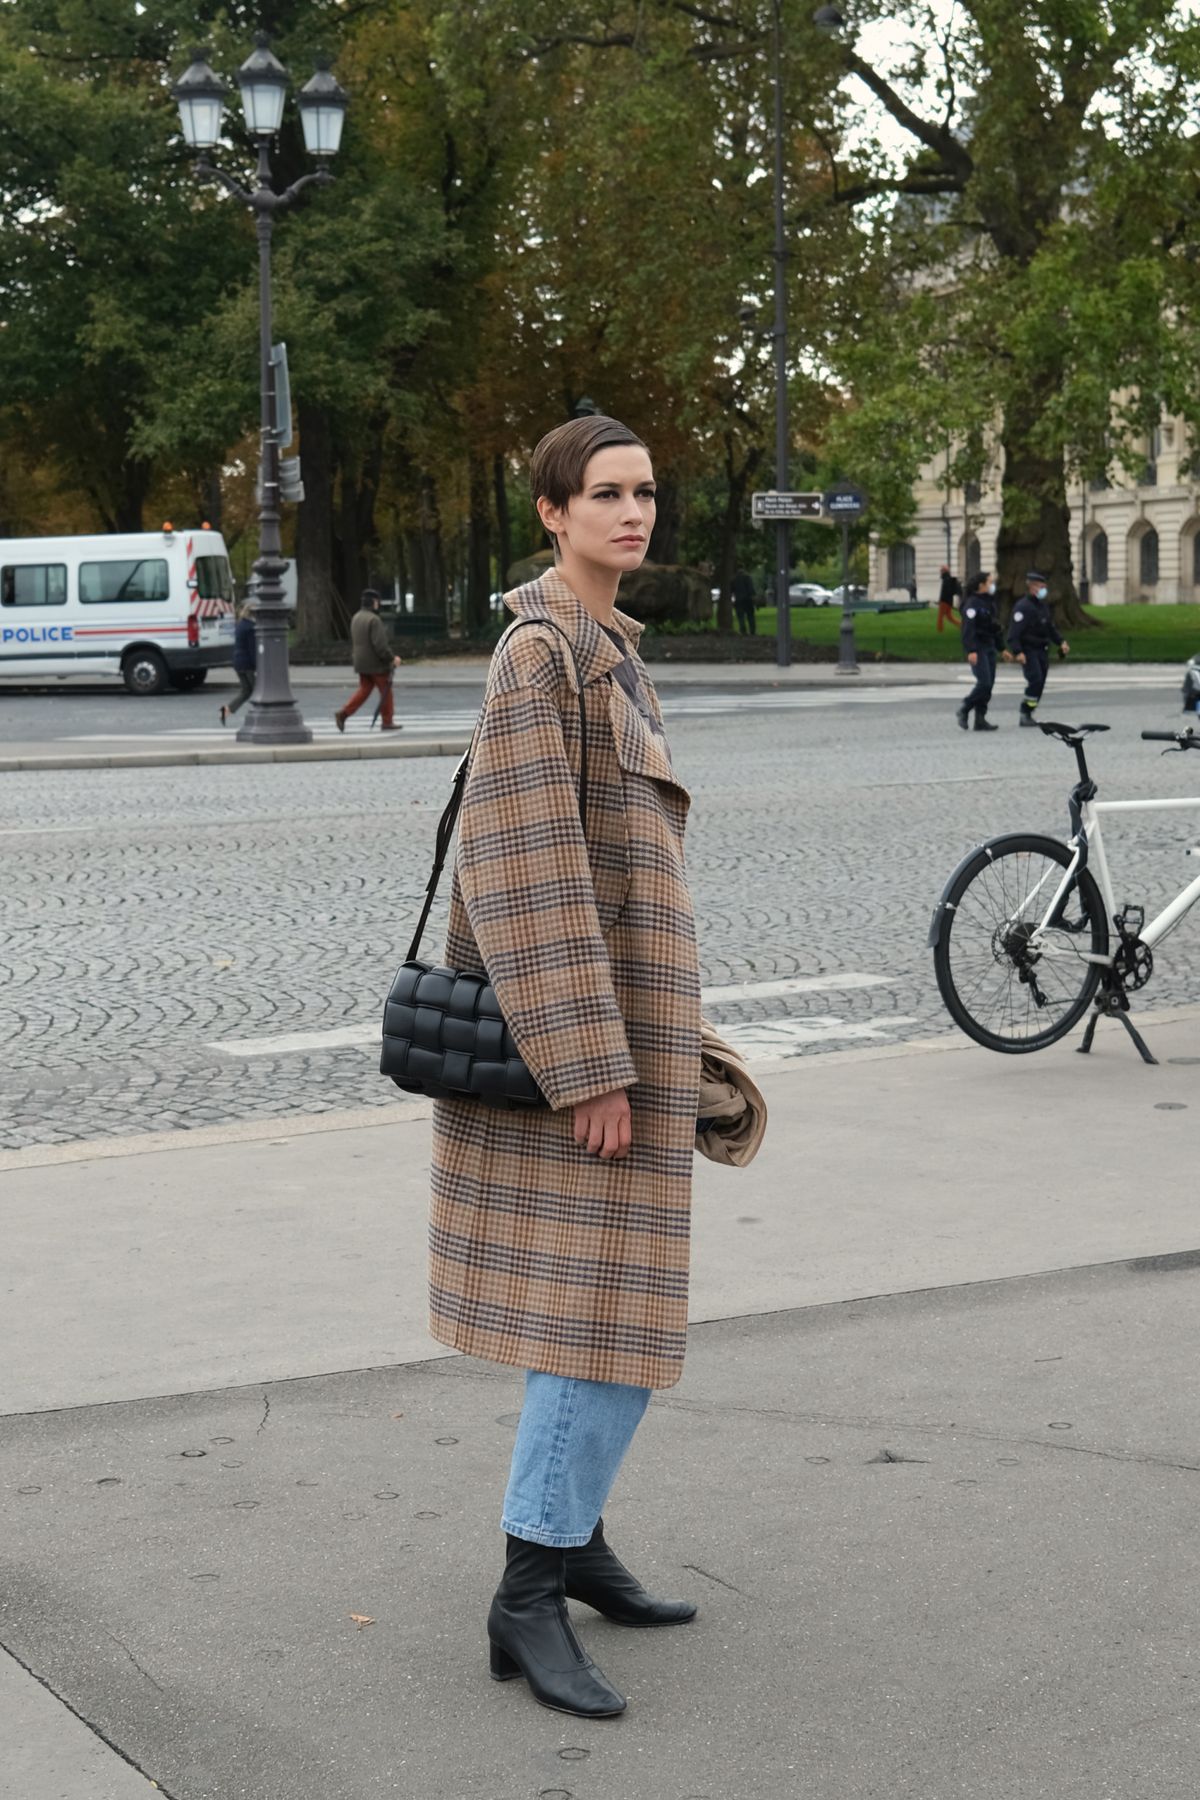 Louise de Chevigny after the Chanel SS21 Show in Paris